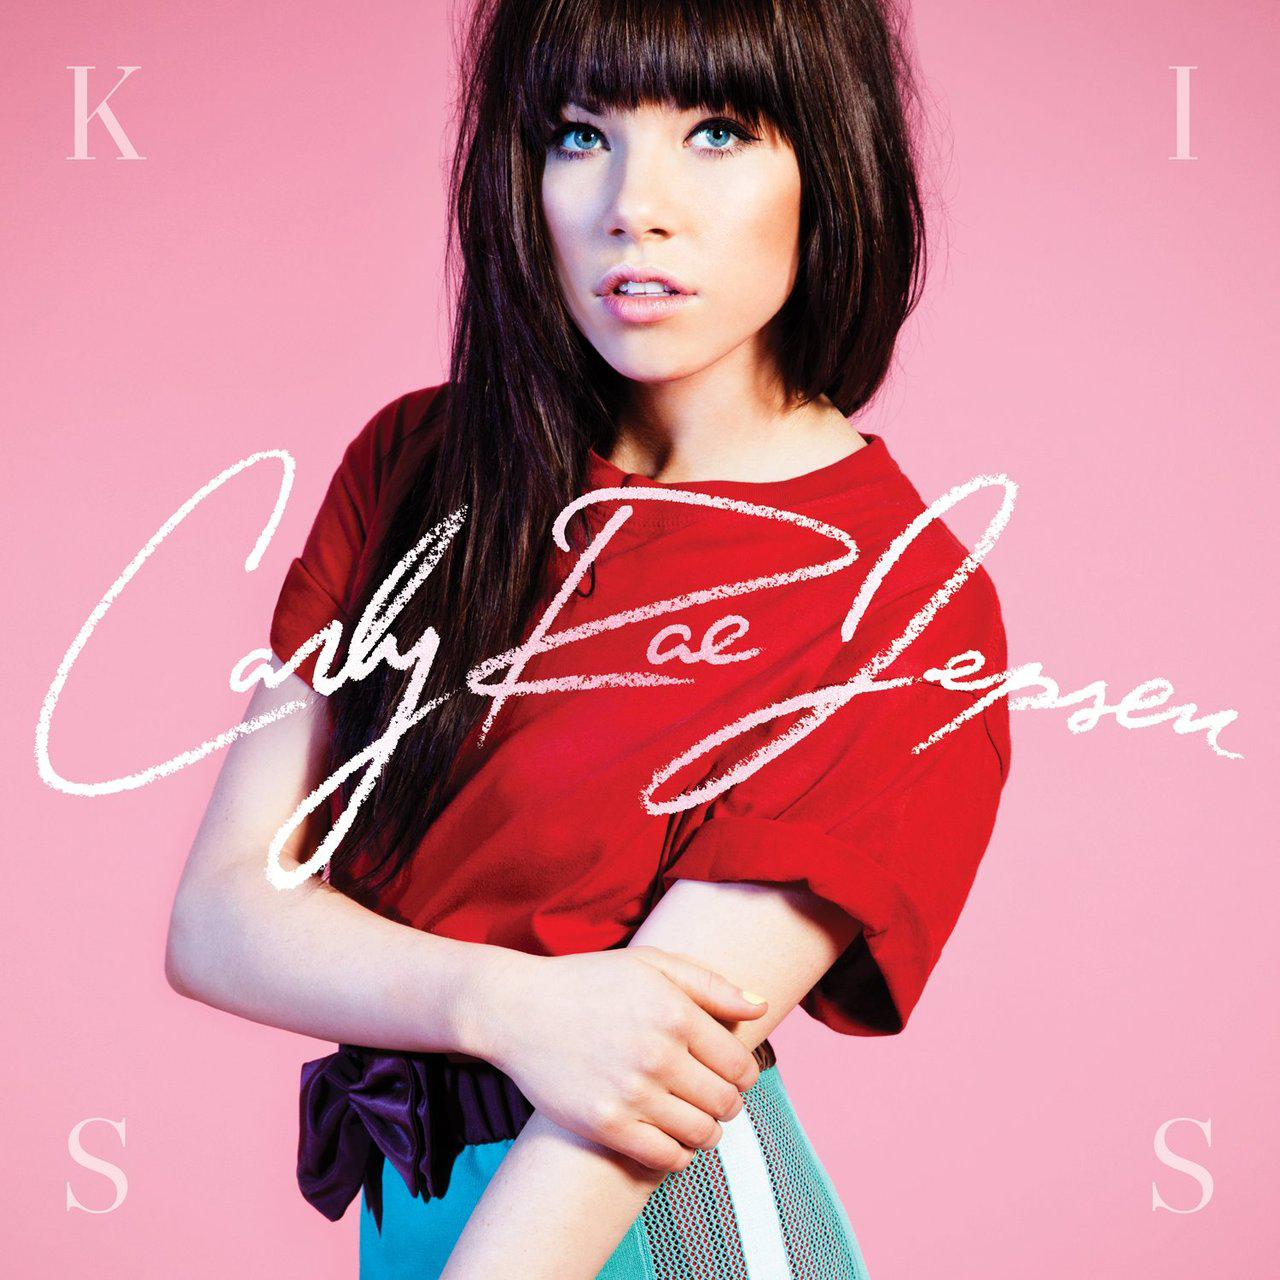 Carly-Rae-Jepsen-Kiss-1280x1280-Official-Album-Cover.png